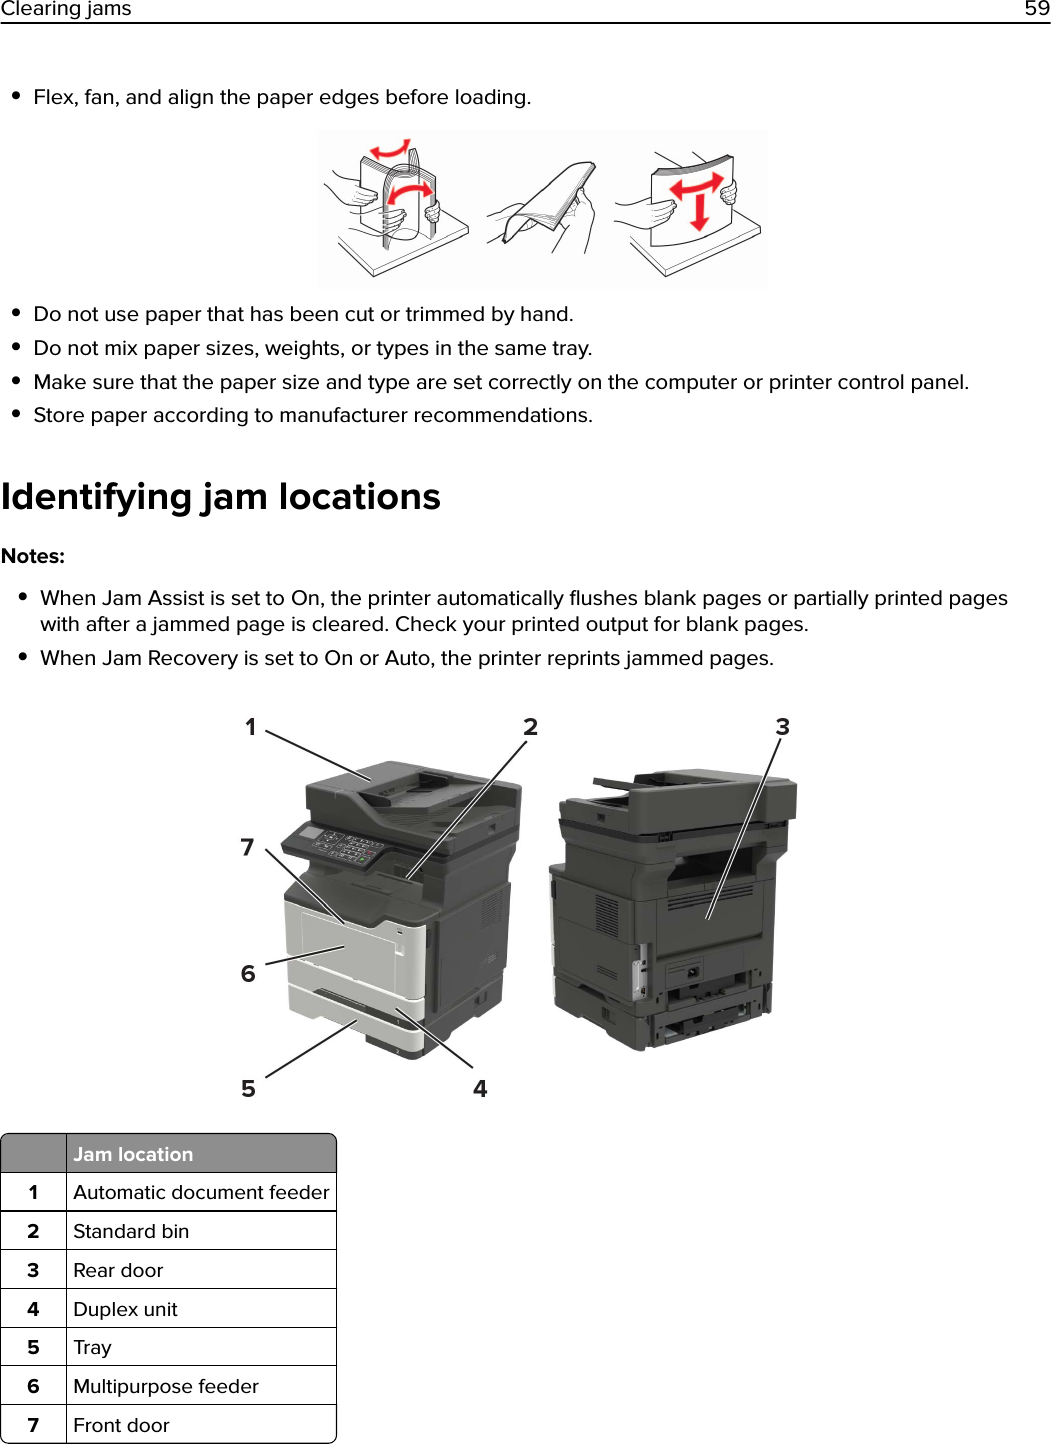 •Flex, fan, and align the paper edges before loading.•Do not use paper that has been cut or trimmed by hand.•Do not mix paper sizes, weights, or types in the same tray.•Make sure that the paper size and type are set correctly on the computer or printer control panel.•Store paper according to manufacturer recommendations.Identifying jam locationsNotes:•When Jam Assist is set to On, the printer automatically ﬂushes blank pages or partially printed pageswith after a jammed page is cleared. Check your printed output for blank pages.•When Jam Recovery is set to On or Auto, the printer reprints jammed pages.Jam location1Automatic document feeder2Standard bin3Rear door4Duplex unit5Tray6Multipurpose feeder7Front doorClearing jams 59